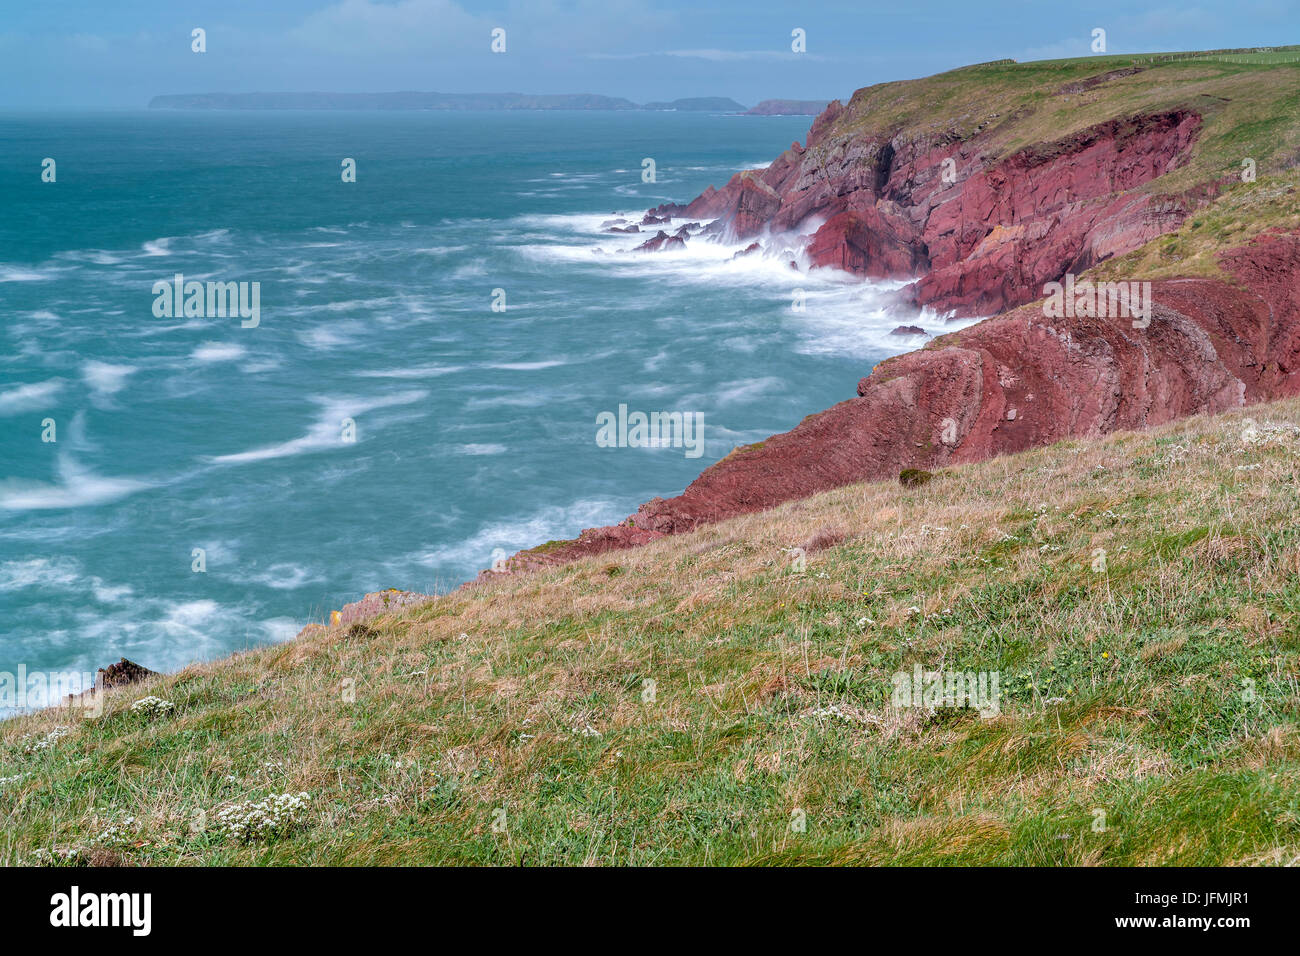 St. Ann's Head at the entrance to the Milford Haven waterway, Dale, Pembrokeshire National Park, Wales, United KIngdom, Europe. Stock Photo